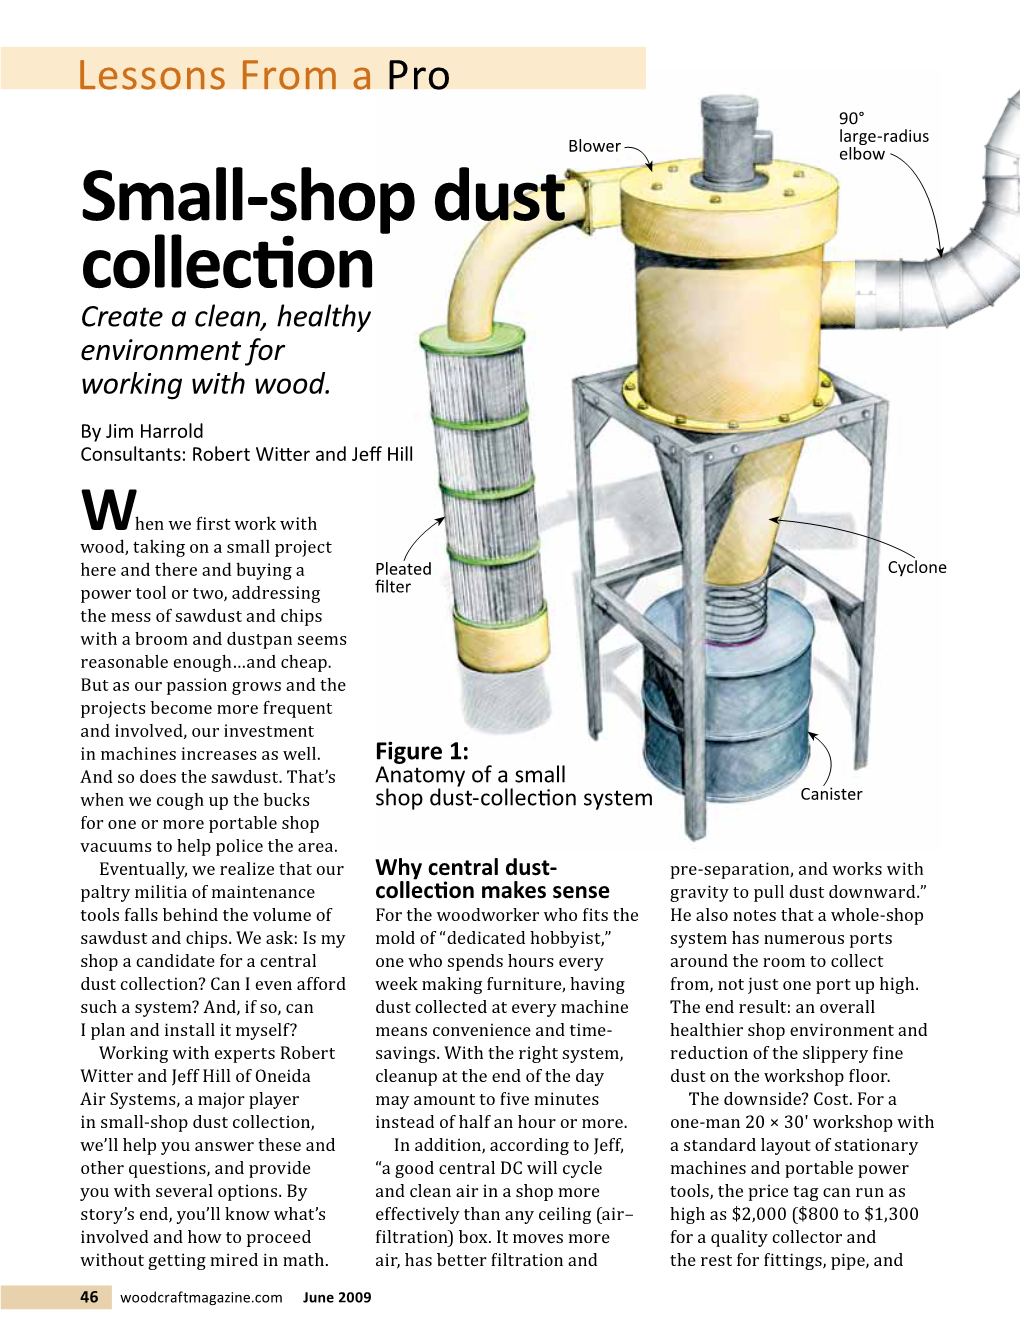 Lessons from a Pro 90° Large-Radius Blower Elbow Small-Shop Dust Collection Create a Clean, Healthy Environment for Working with Wood